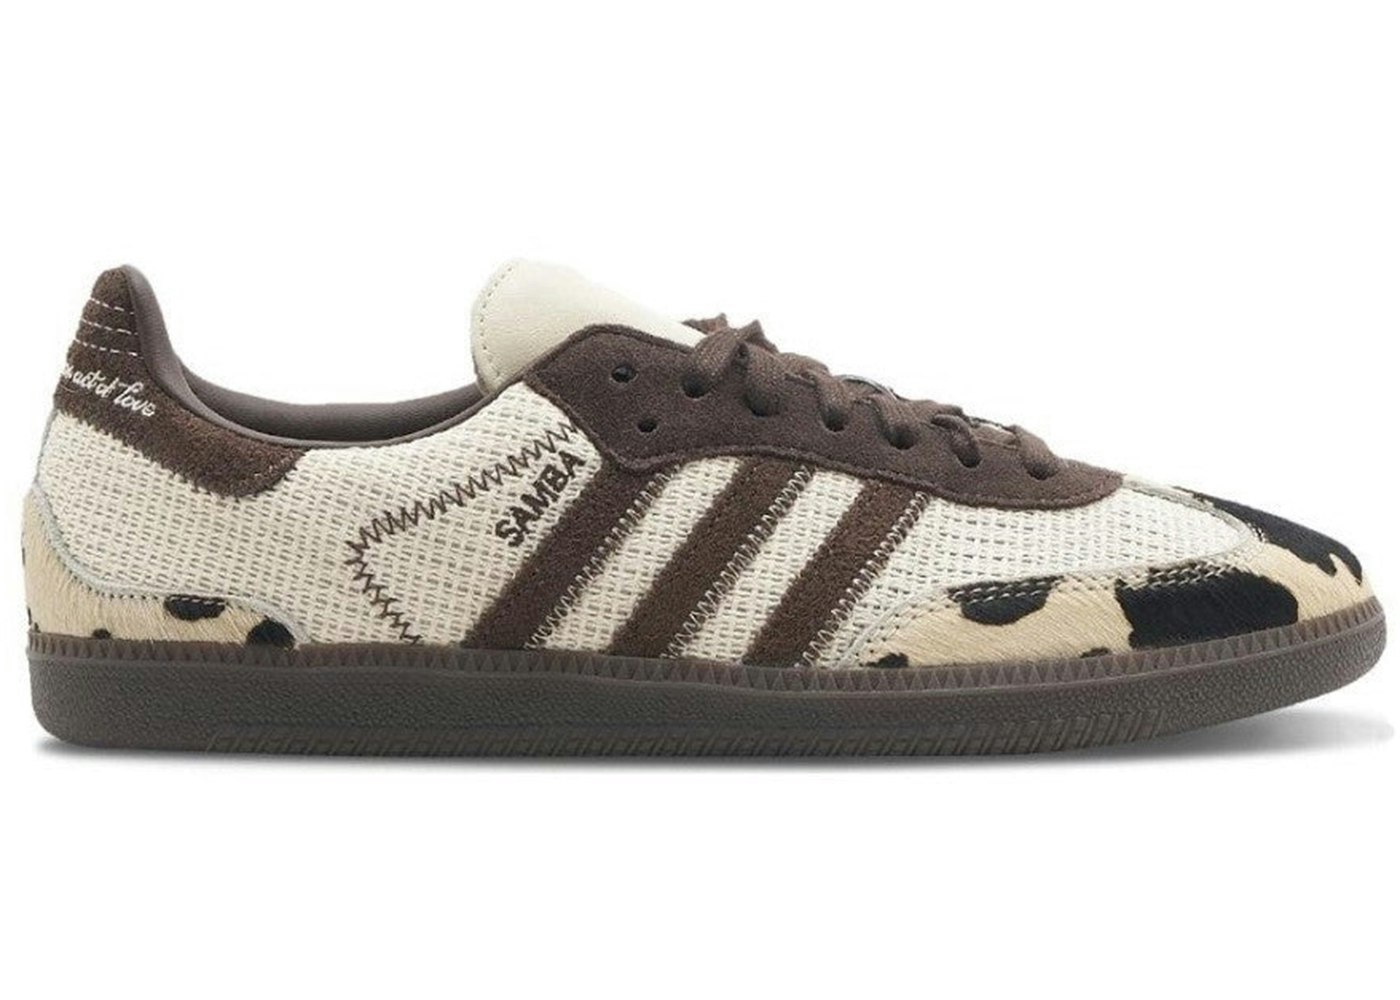 Adidas Cheetah Print Superstar Sneaker | Sneakers, Snicker shoes,  Superstars shoes